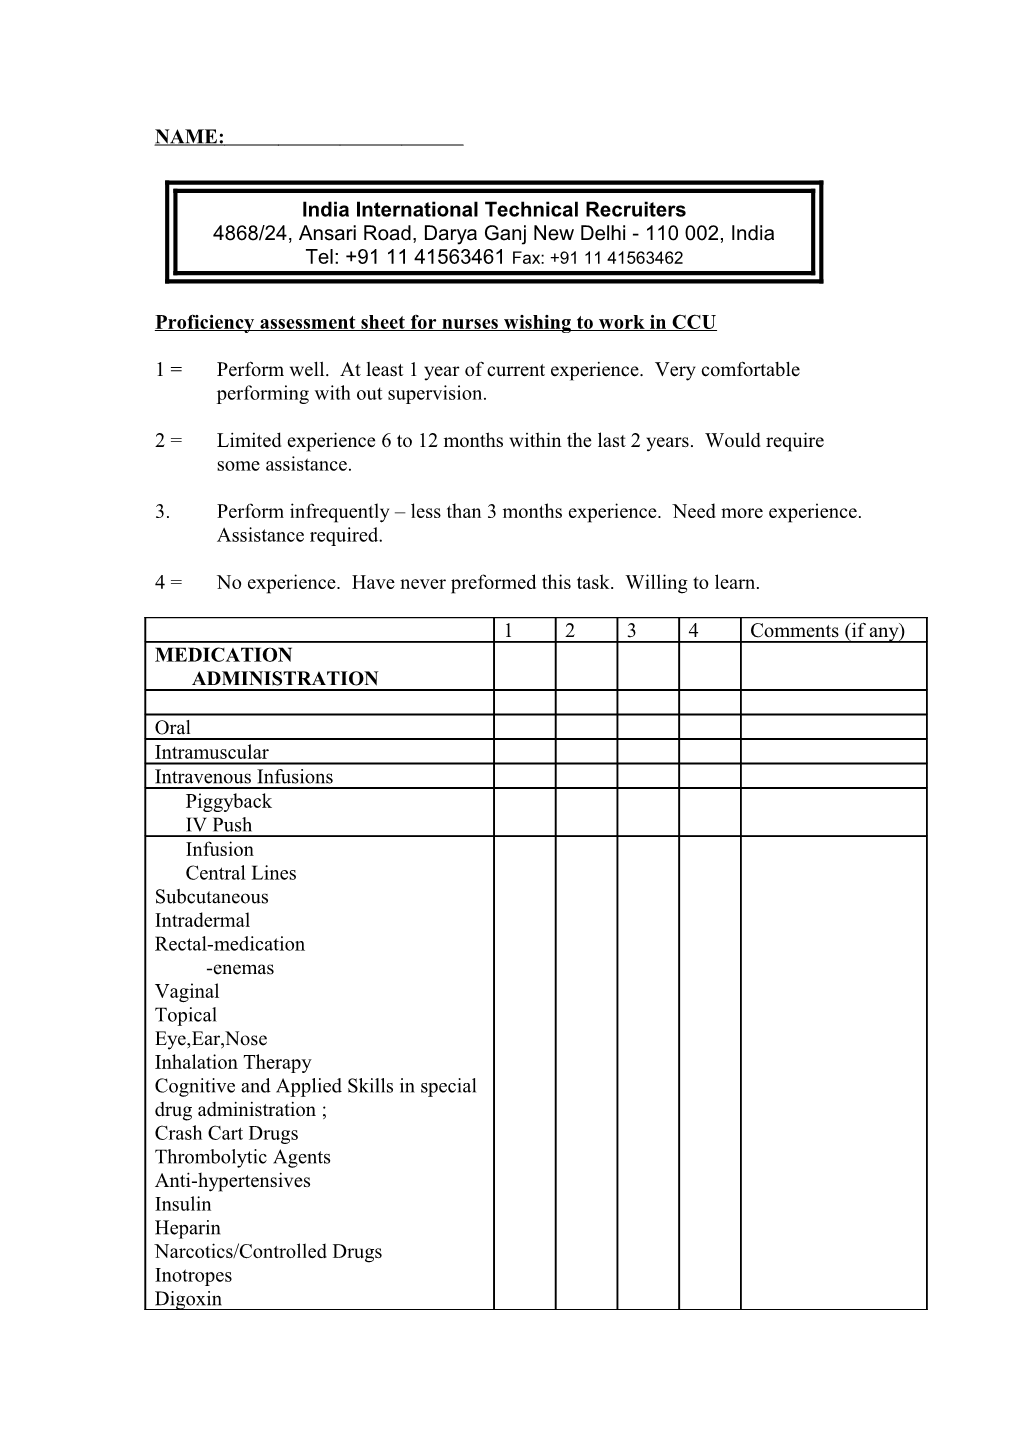 Proficiency Assessment Sheet for Nurses Wishing to Work in CCU